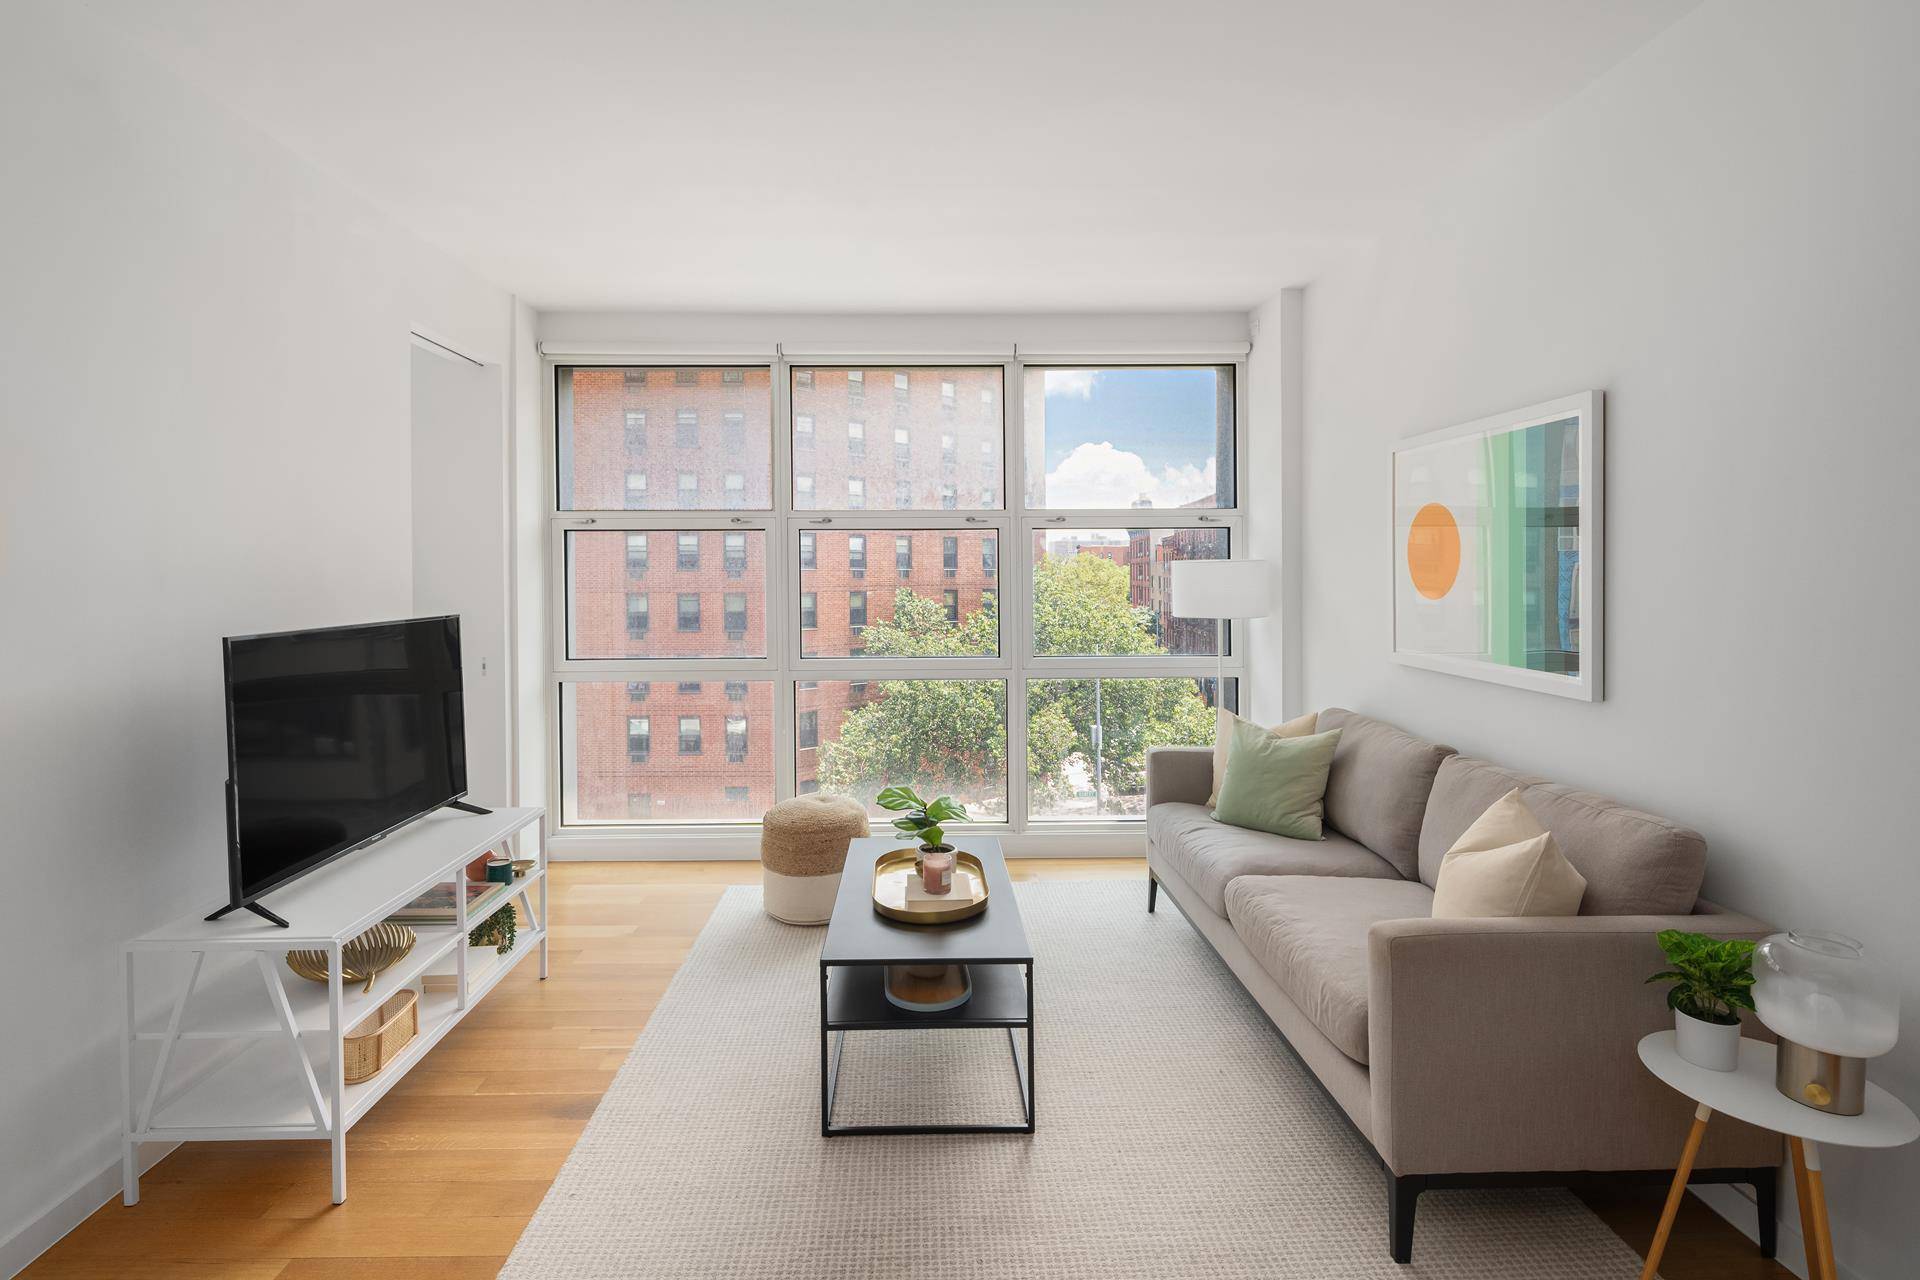 Located on the Bowery in the heart of Nolita, this immaculate one bedroom, one bathroom home is turn key and ready for your personal touch !